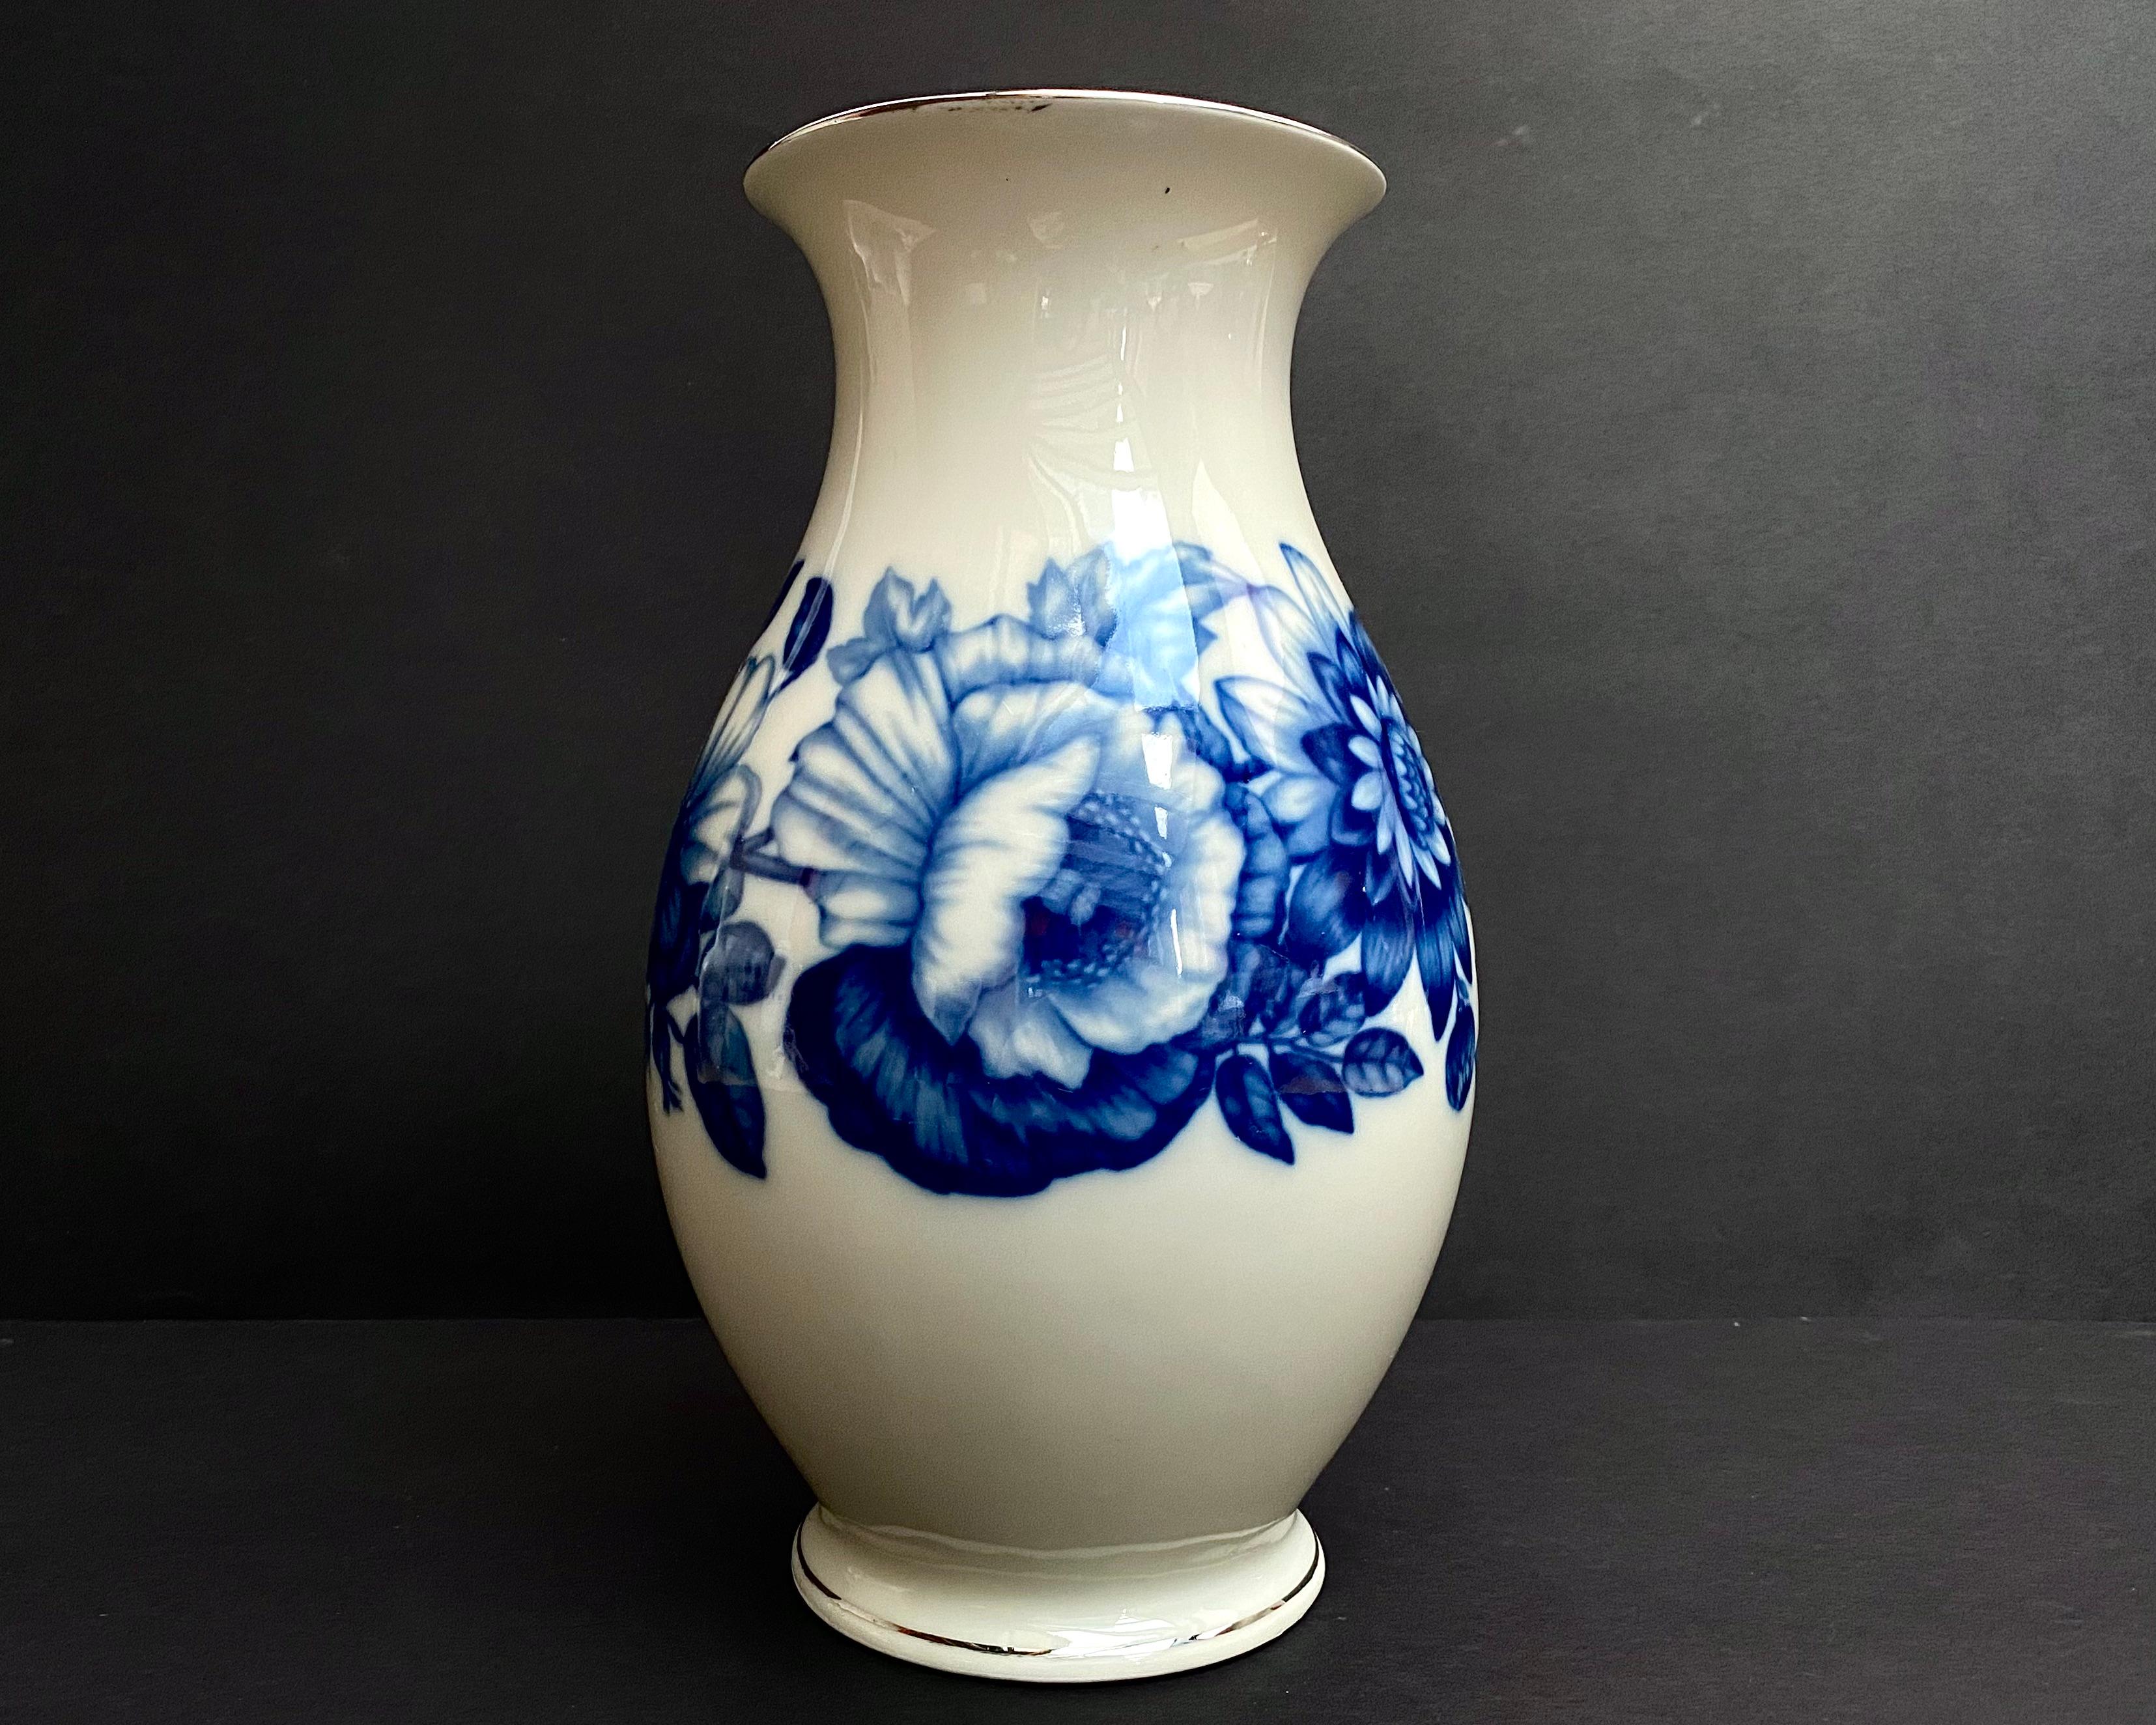 Vintage porcelain vase for flowers.

A true example of grace and elegant style from the best German craftsmen of the KPM manufactory, 1950s.

Suitable for decorating various rooms, such as bedroom, living room or kitchen.

Its laconic appearance and